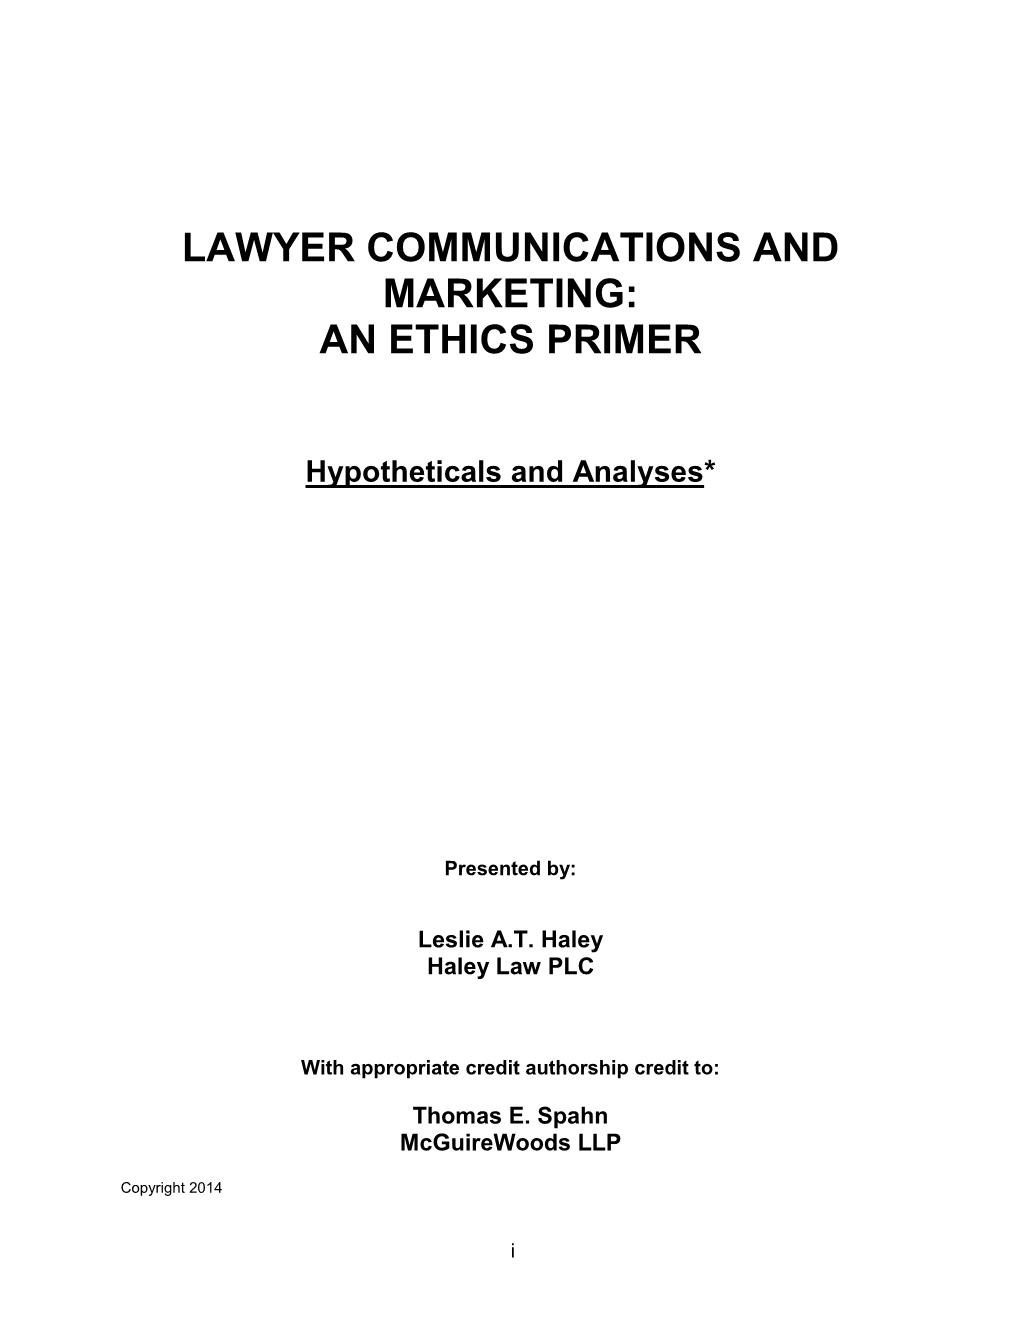 Lawyer Communications and Marketing: an Ethics Primer